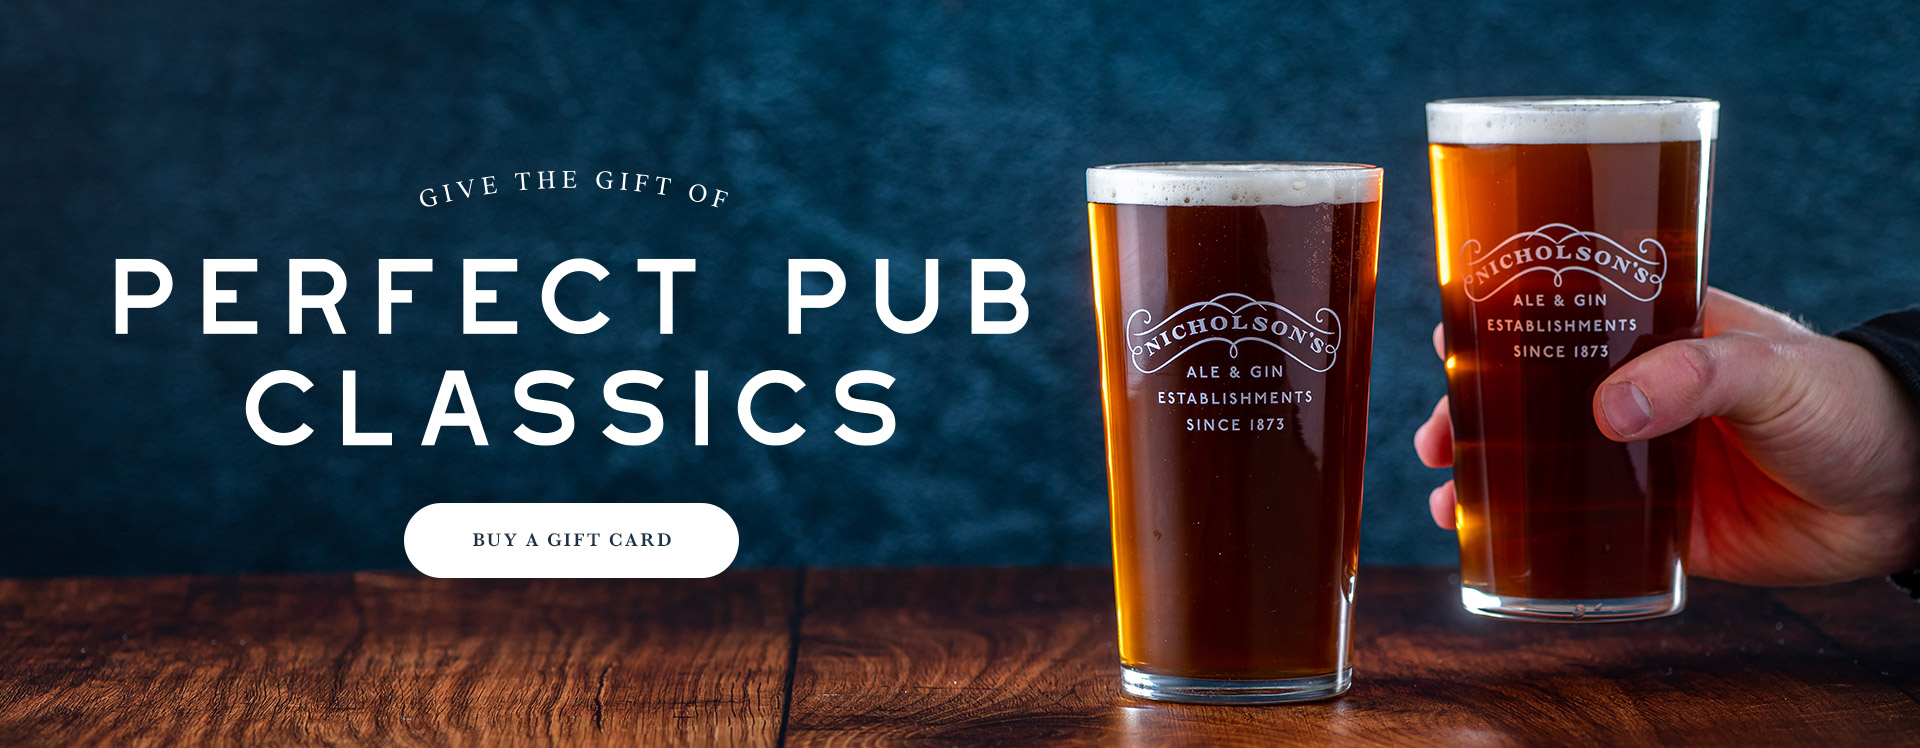 Nicholson’s Pub Gift Voucher at The Chequers in Oxford